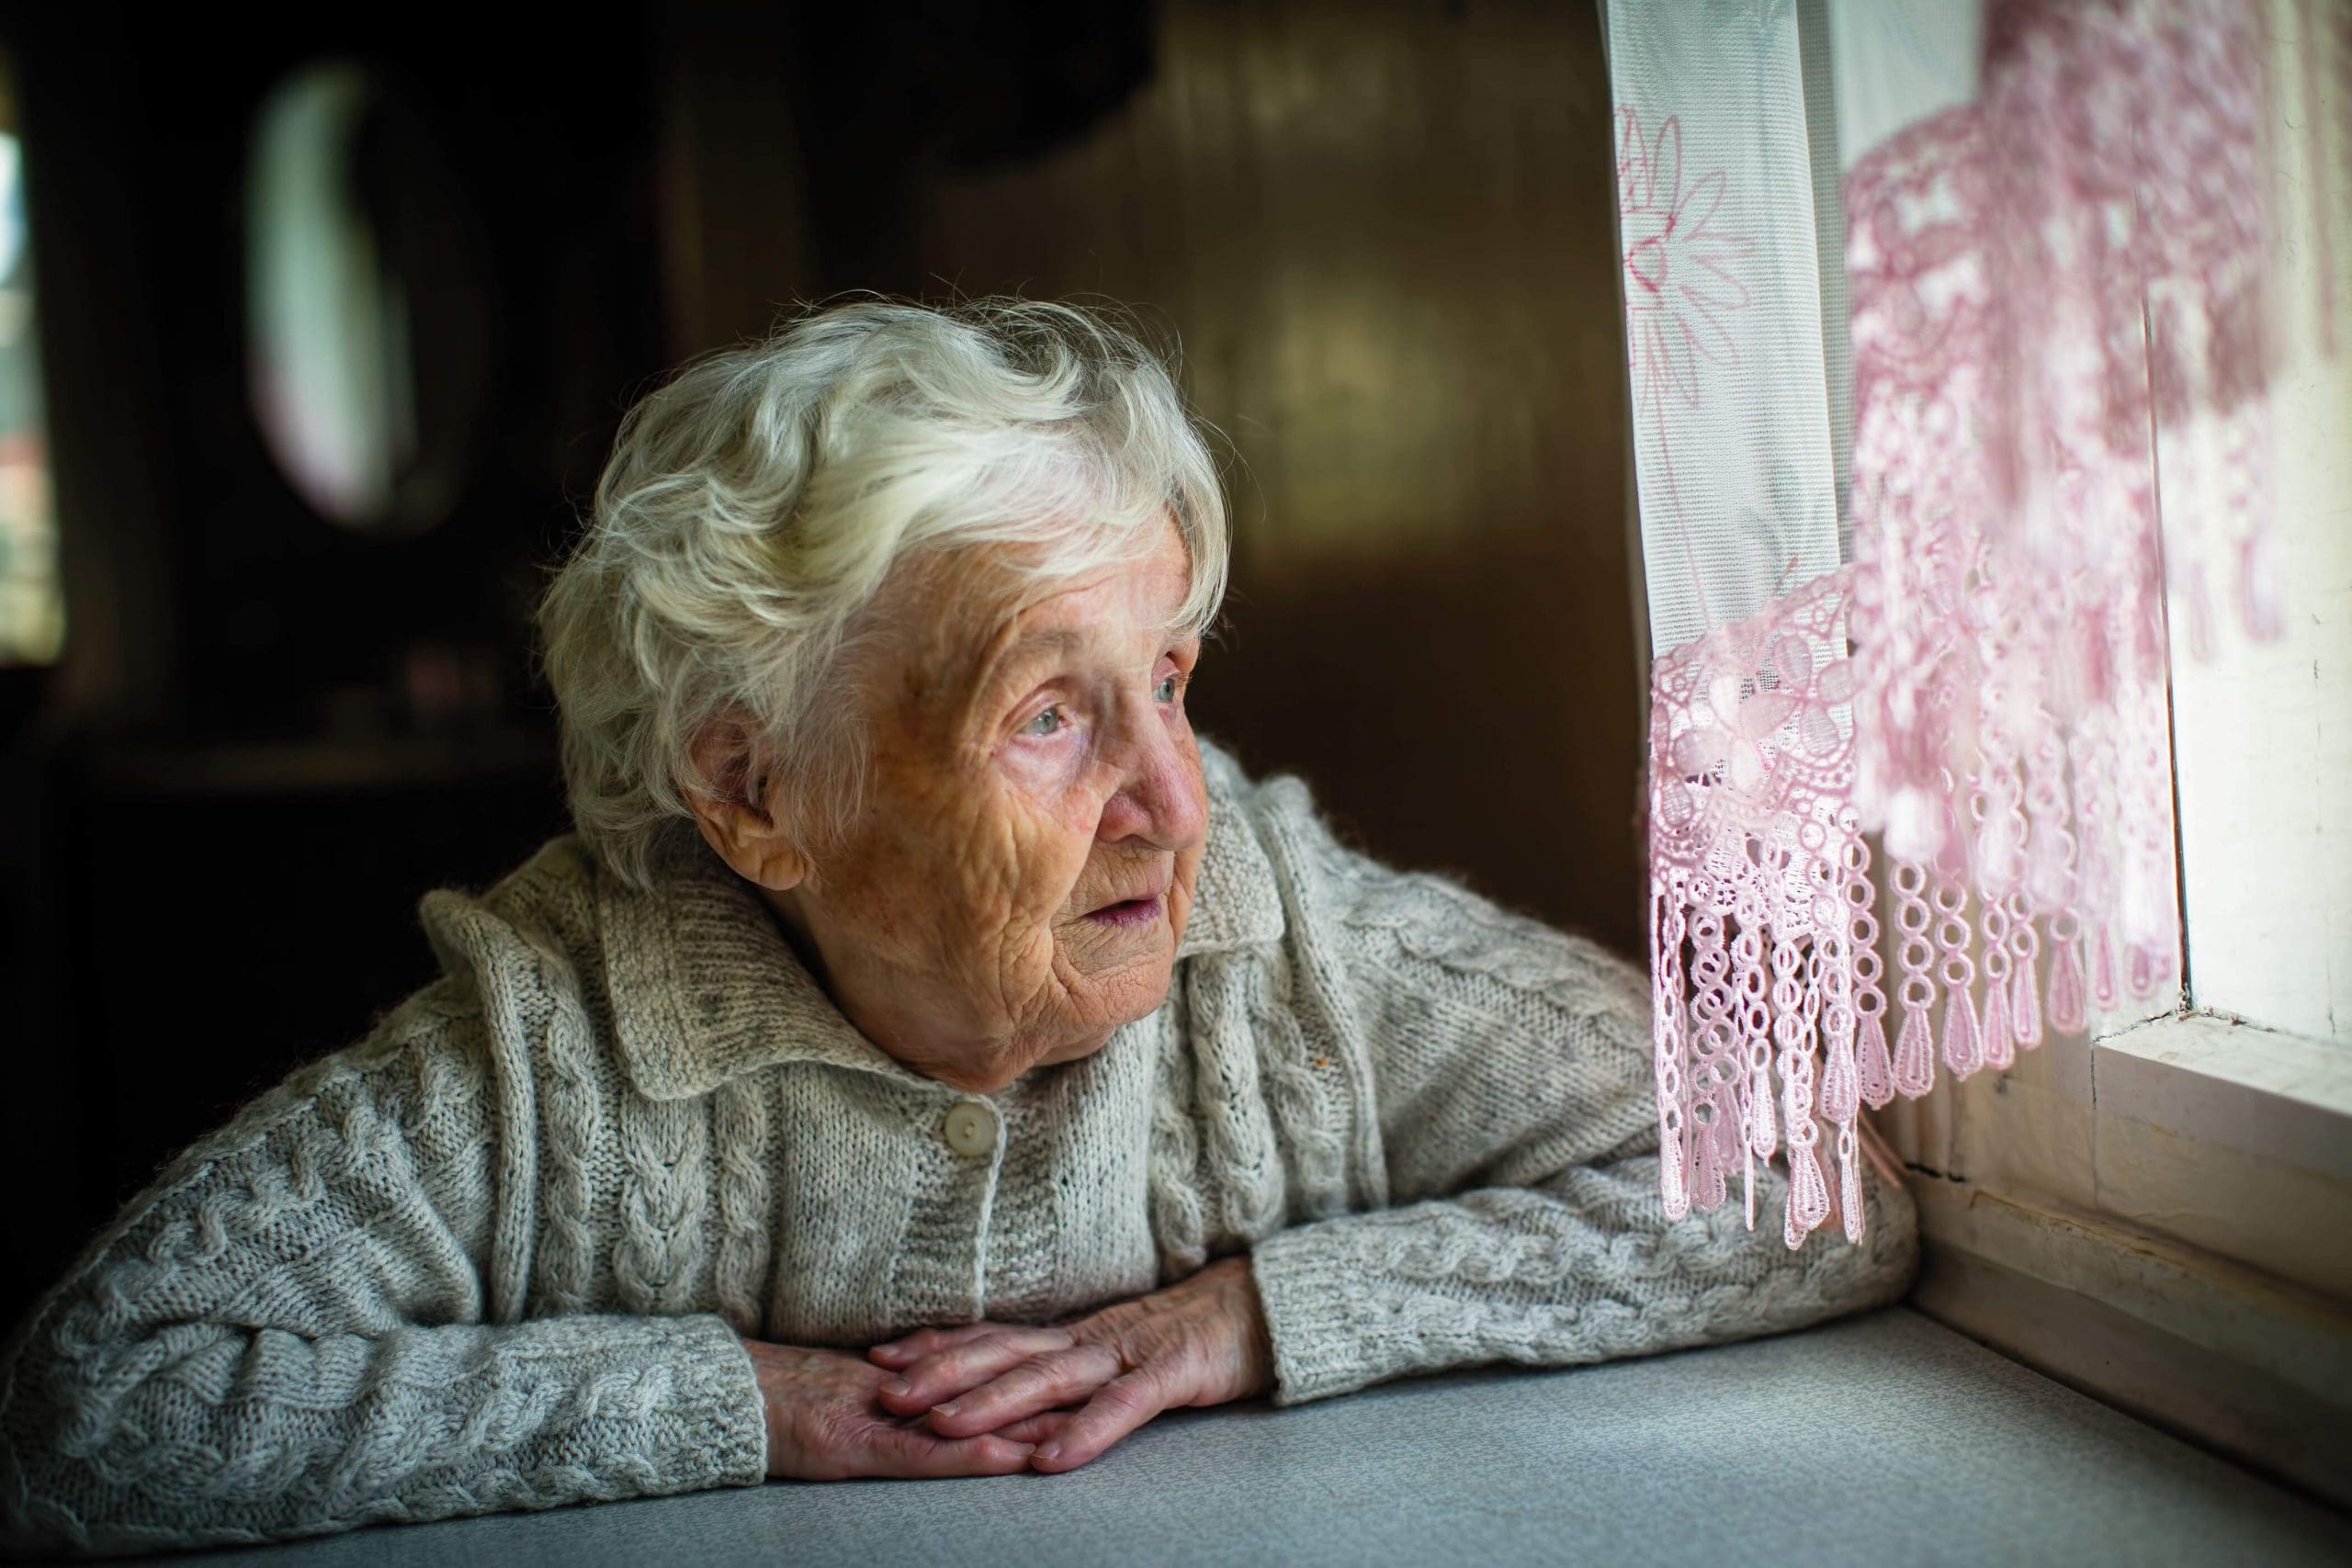 Elderly woman sits at a table staring longingly out the window